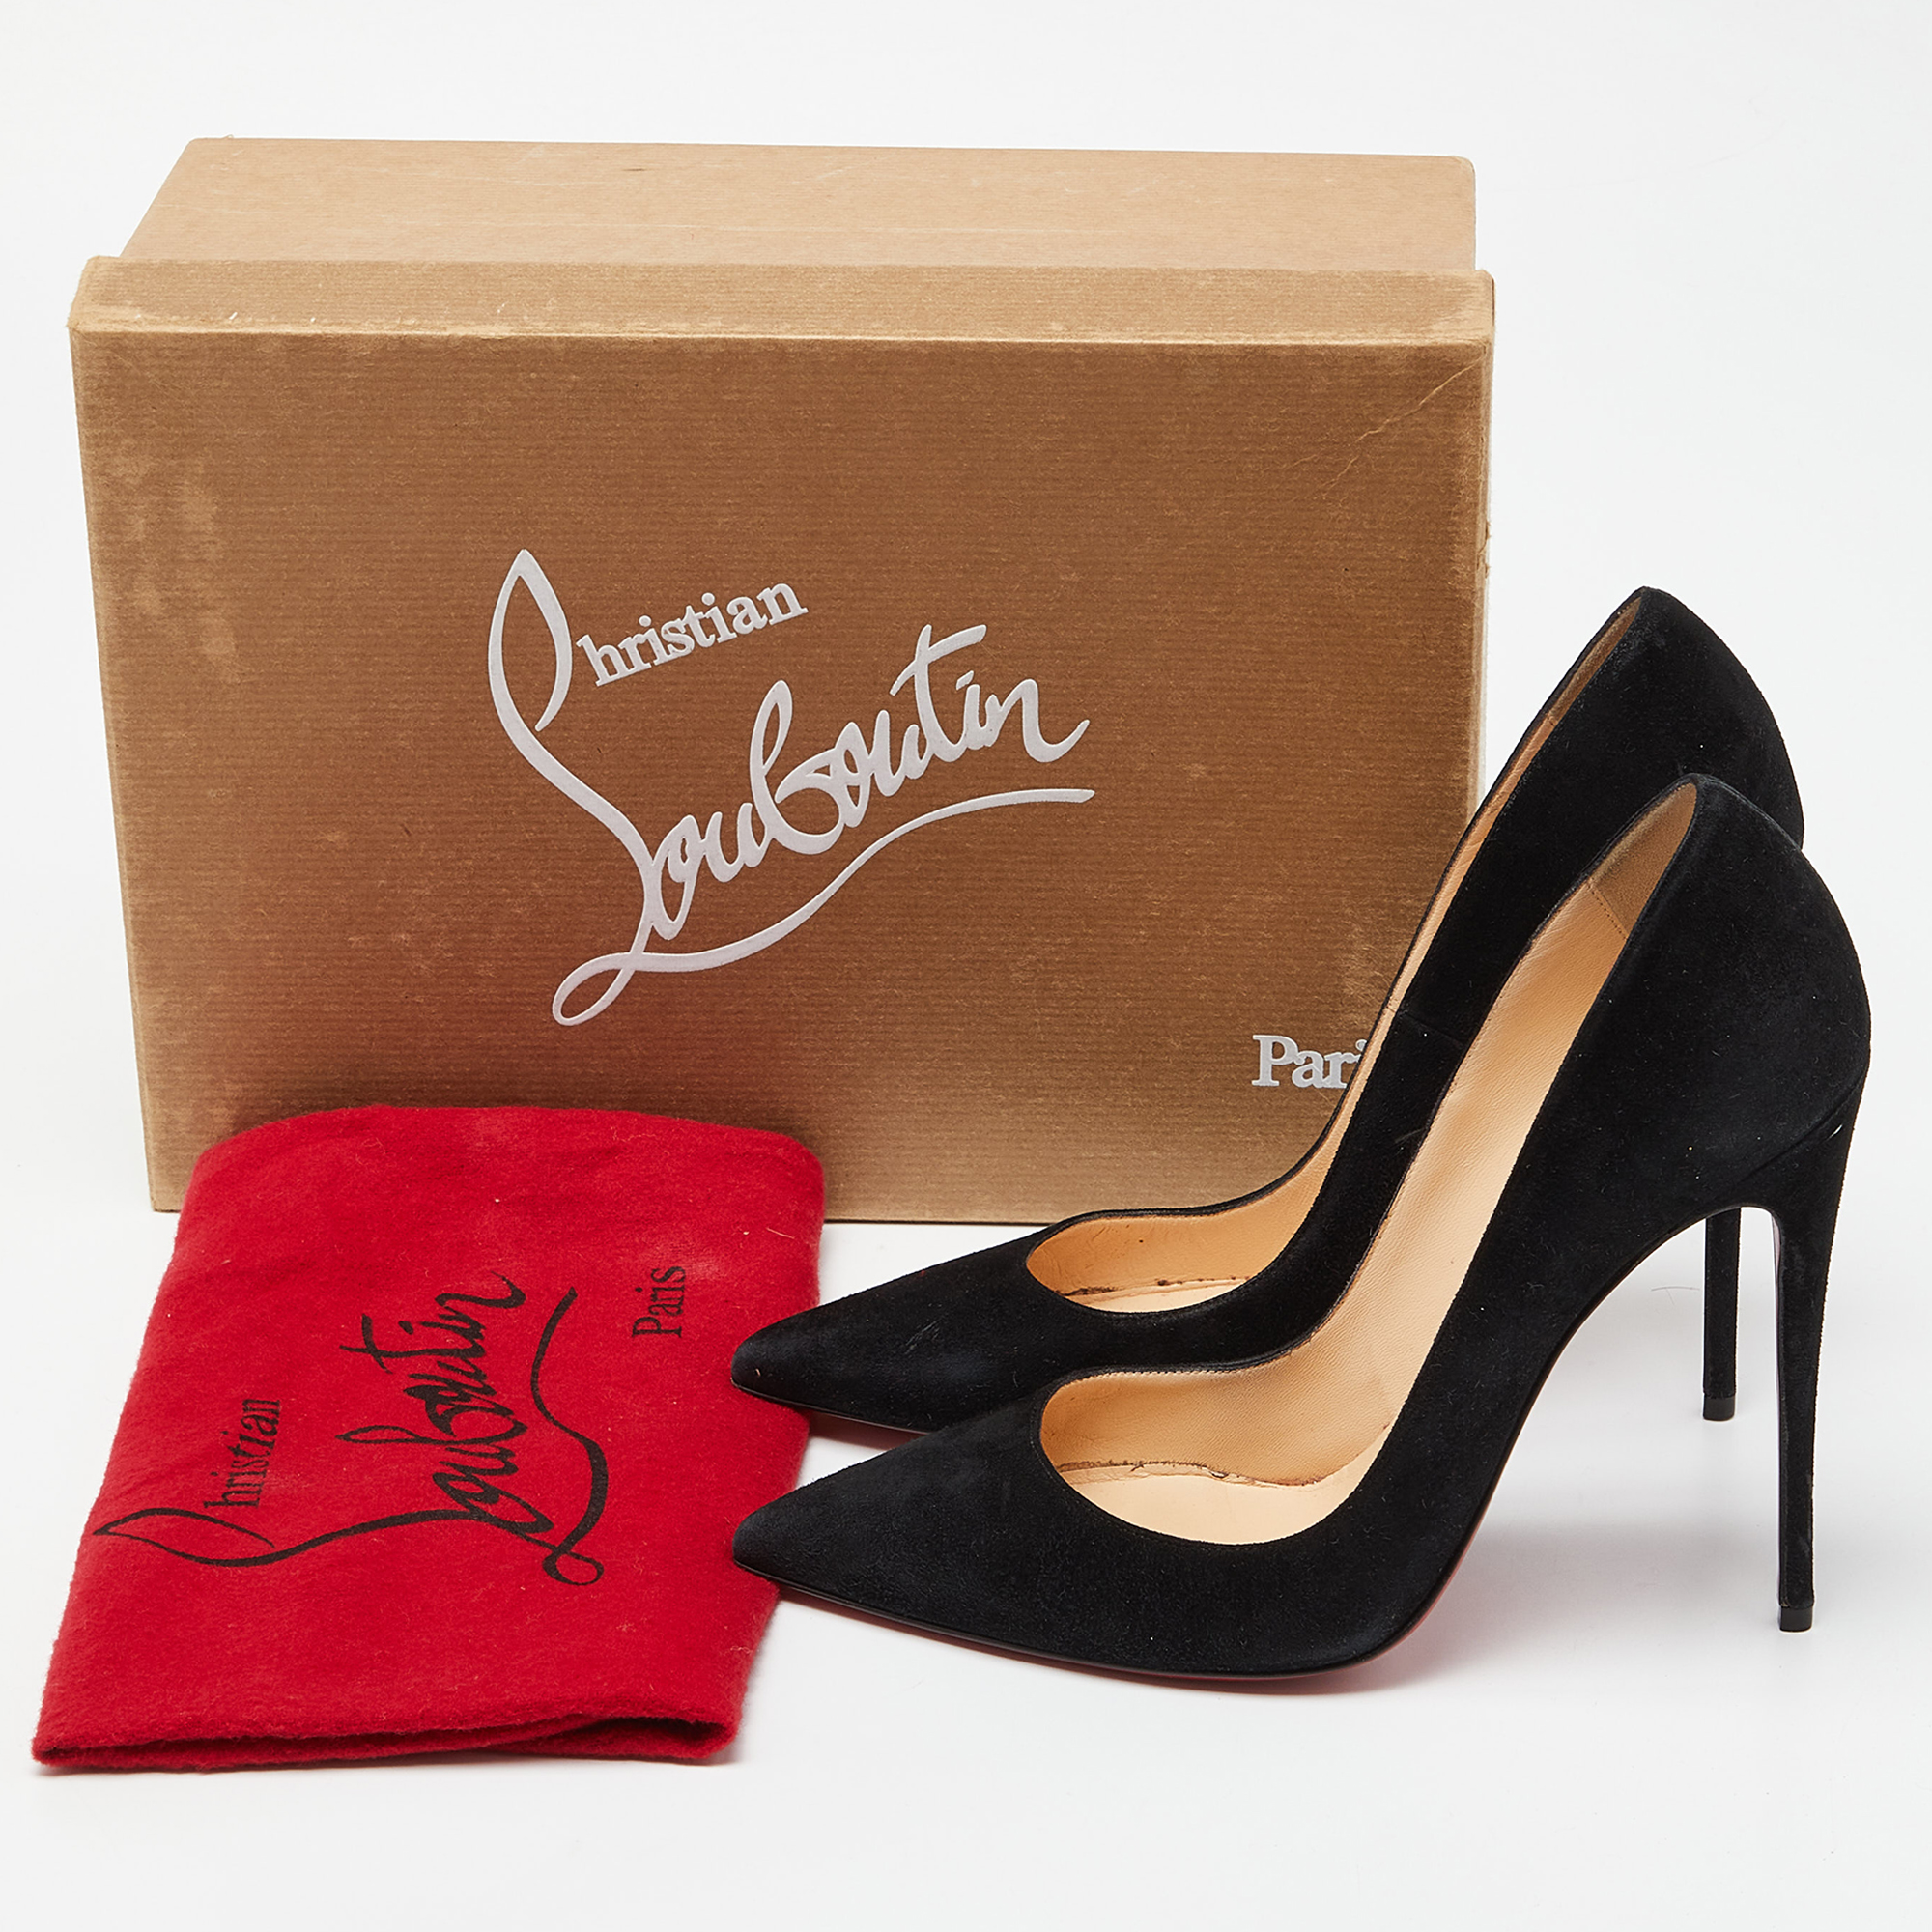 Christian Louboutin Black Suede So Kate Pointed Toe Pumps Size 38